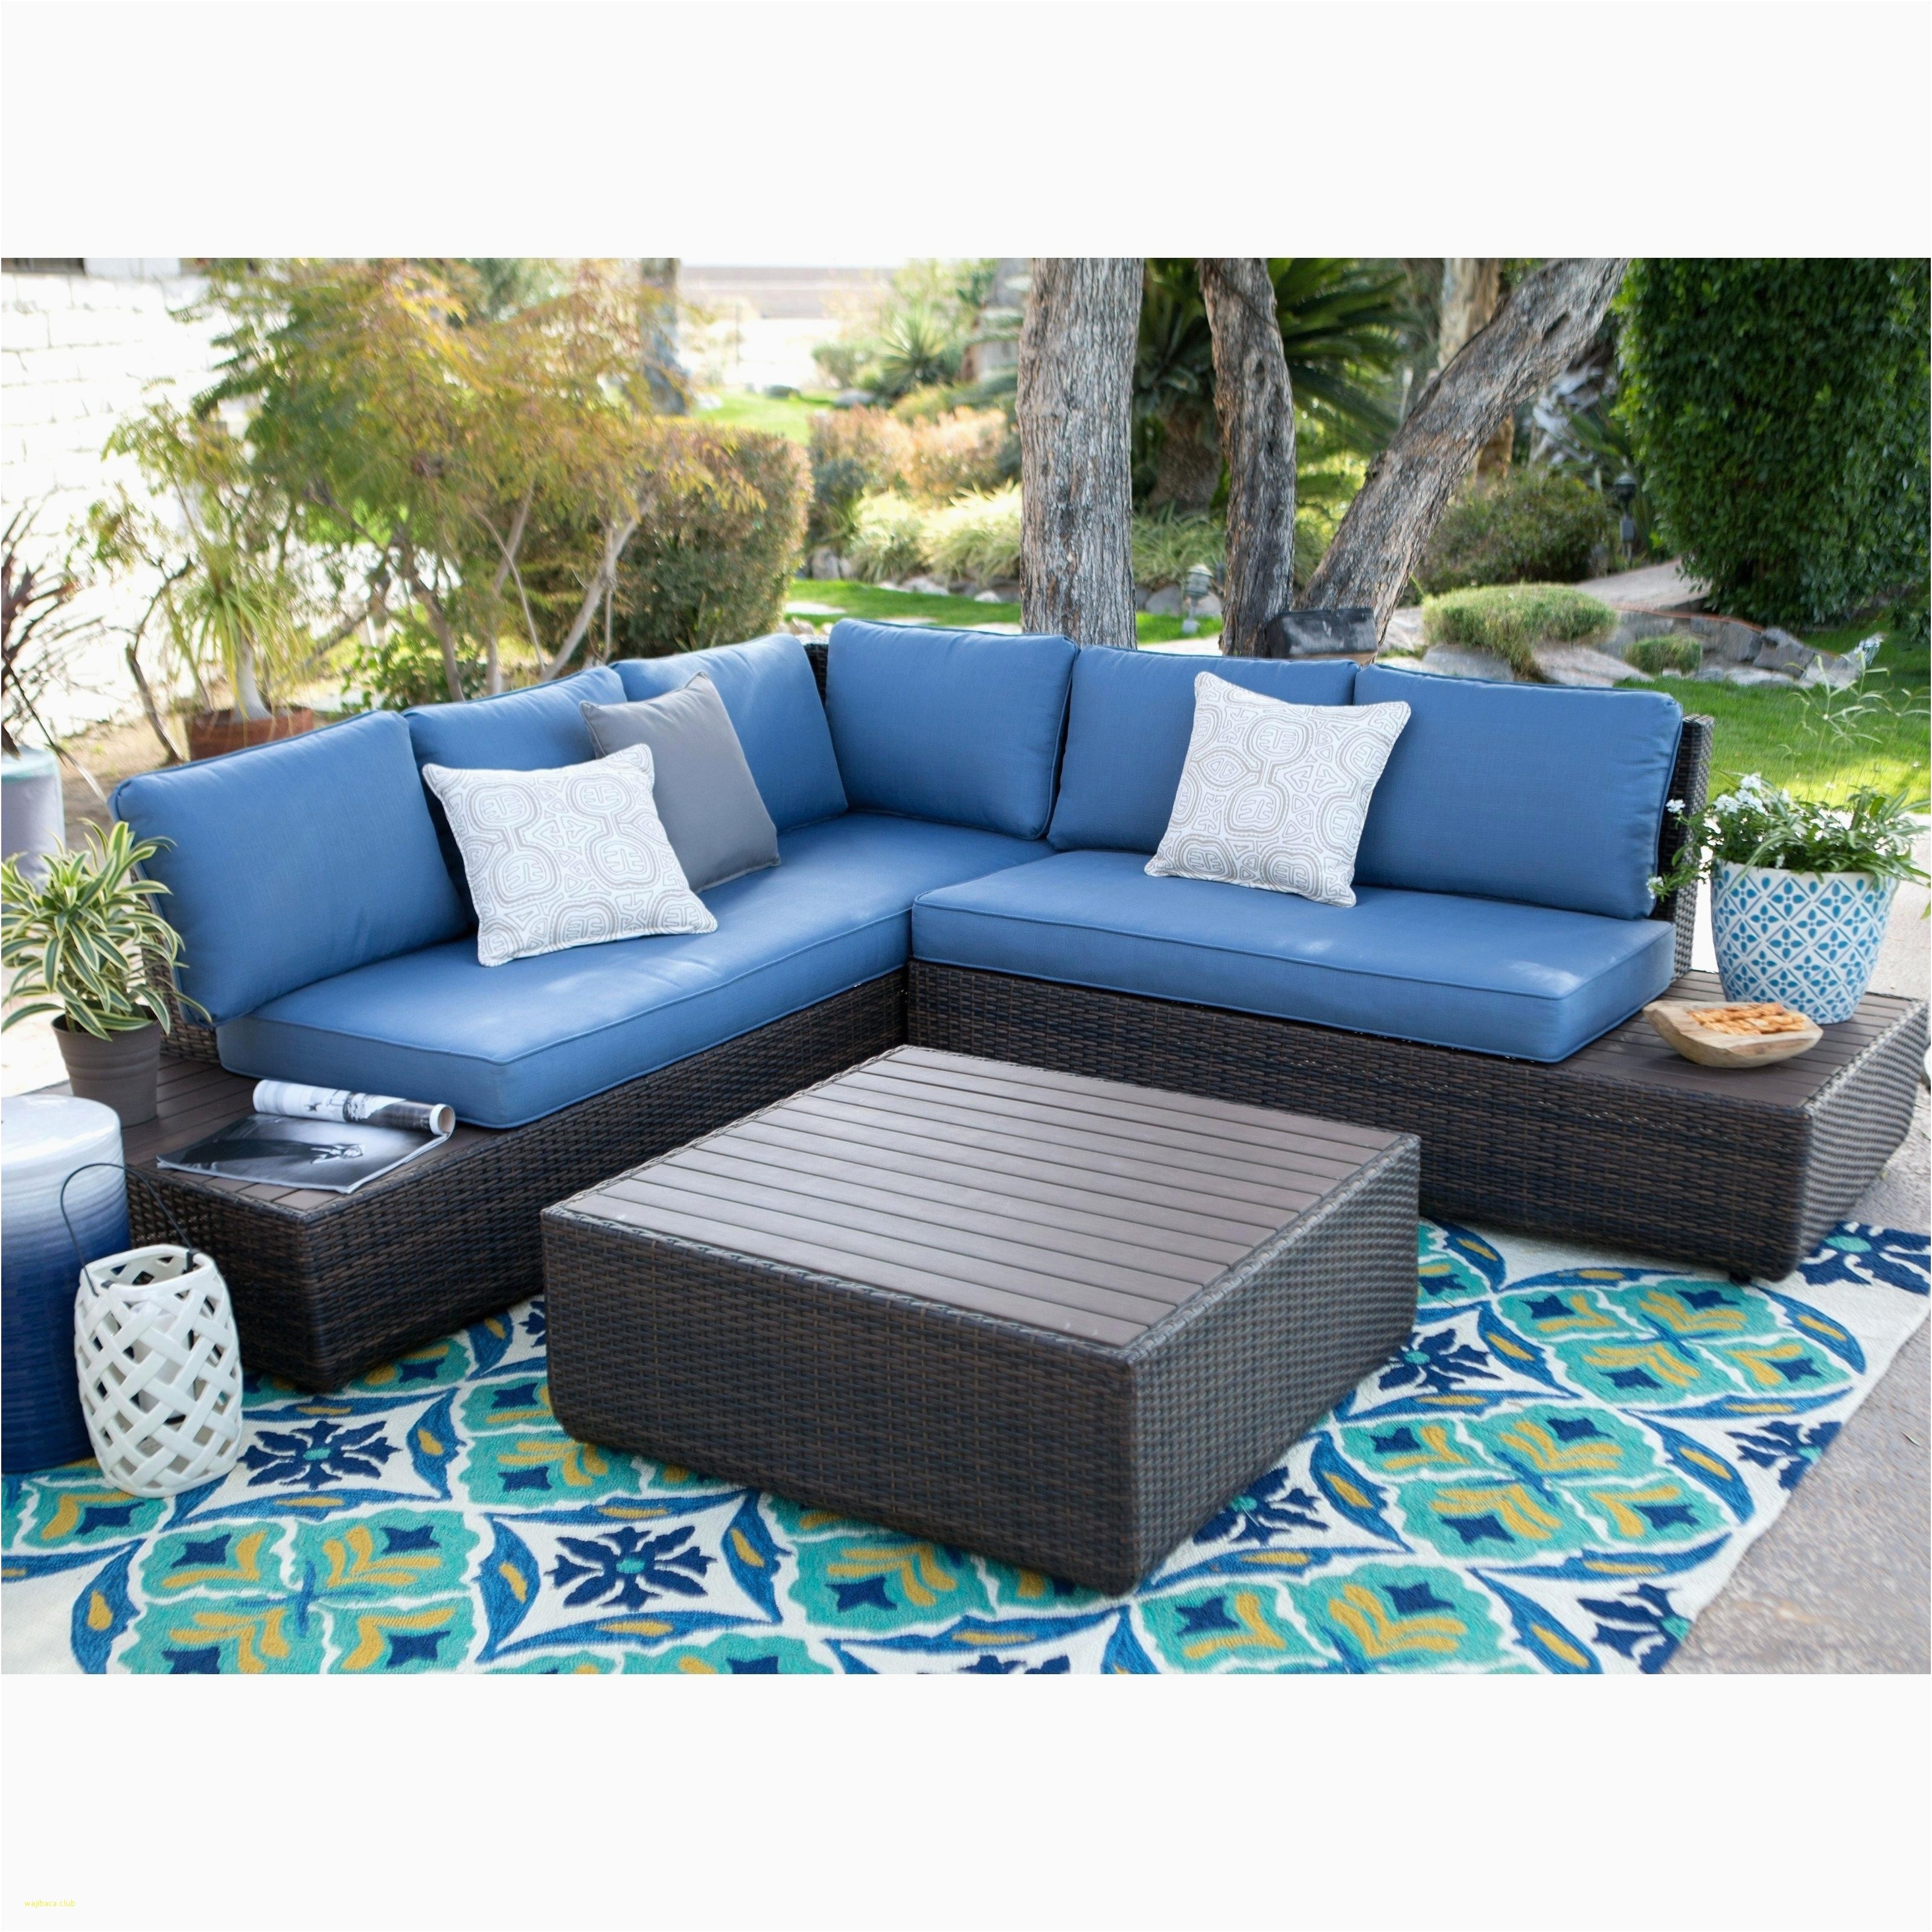 teal patio furniture outdoor patio furniture near me new wicker outdoor sofa 0d patio of 56